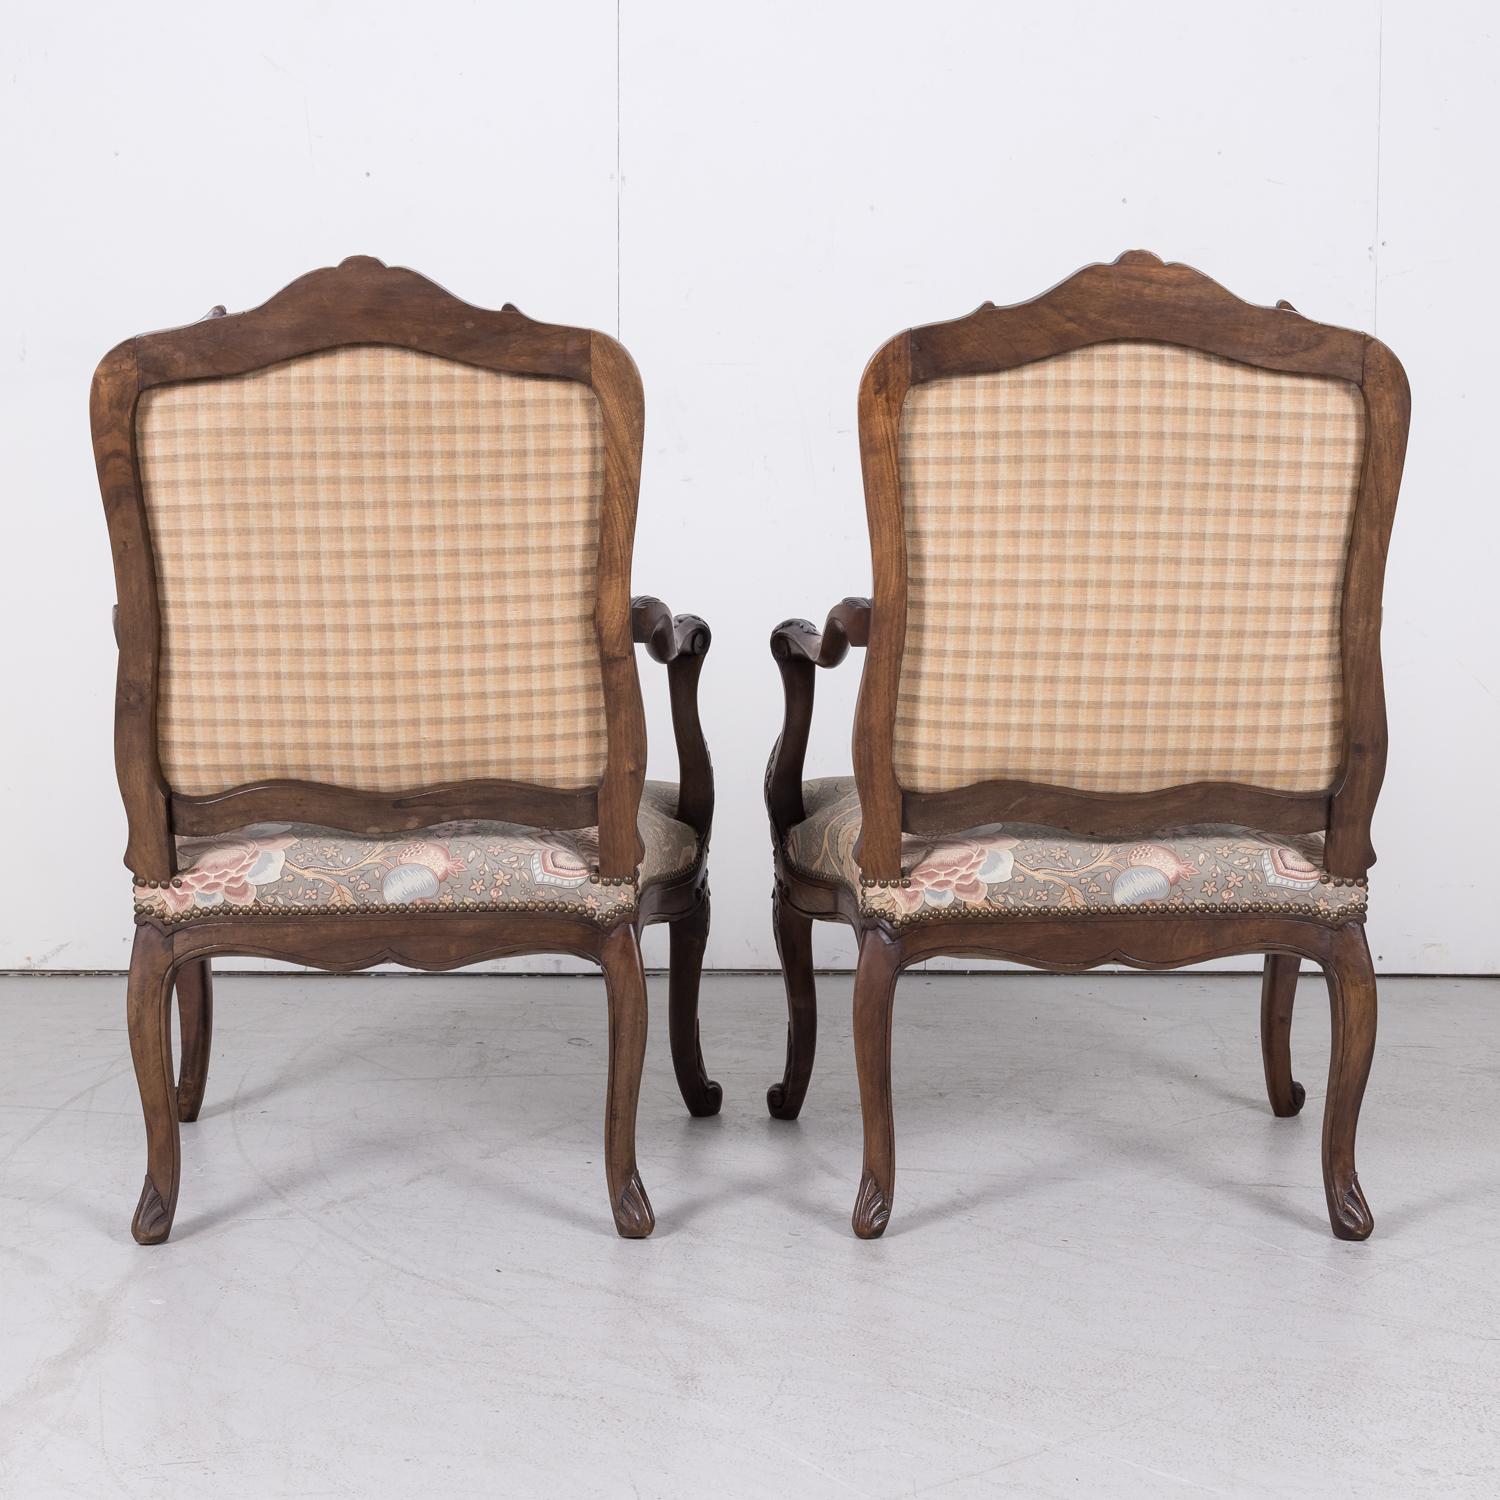 Fine Pair of 18th Century French Louis XV Period Carved Walnut Fauteuils For Sale 12